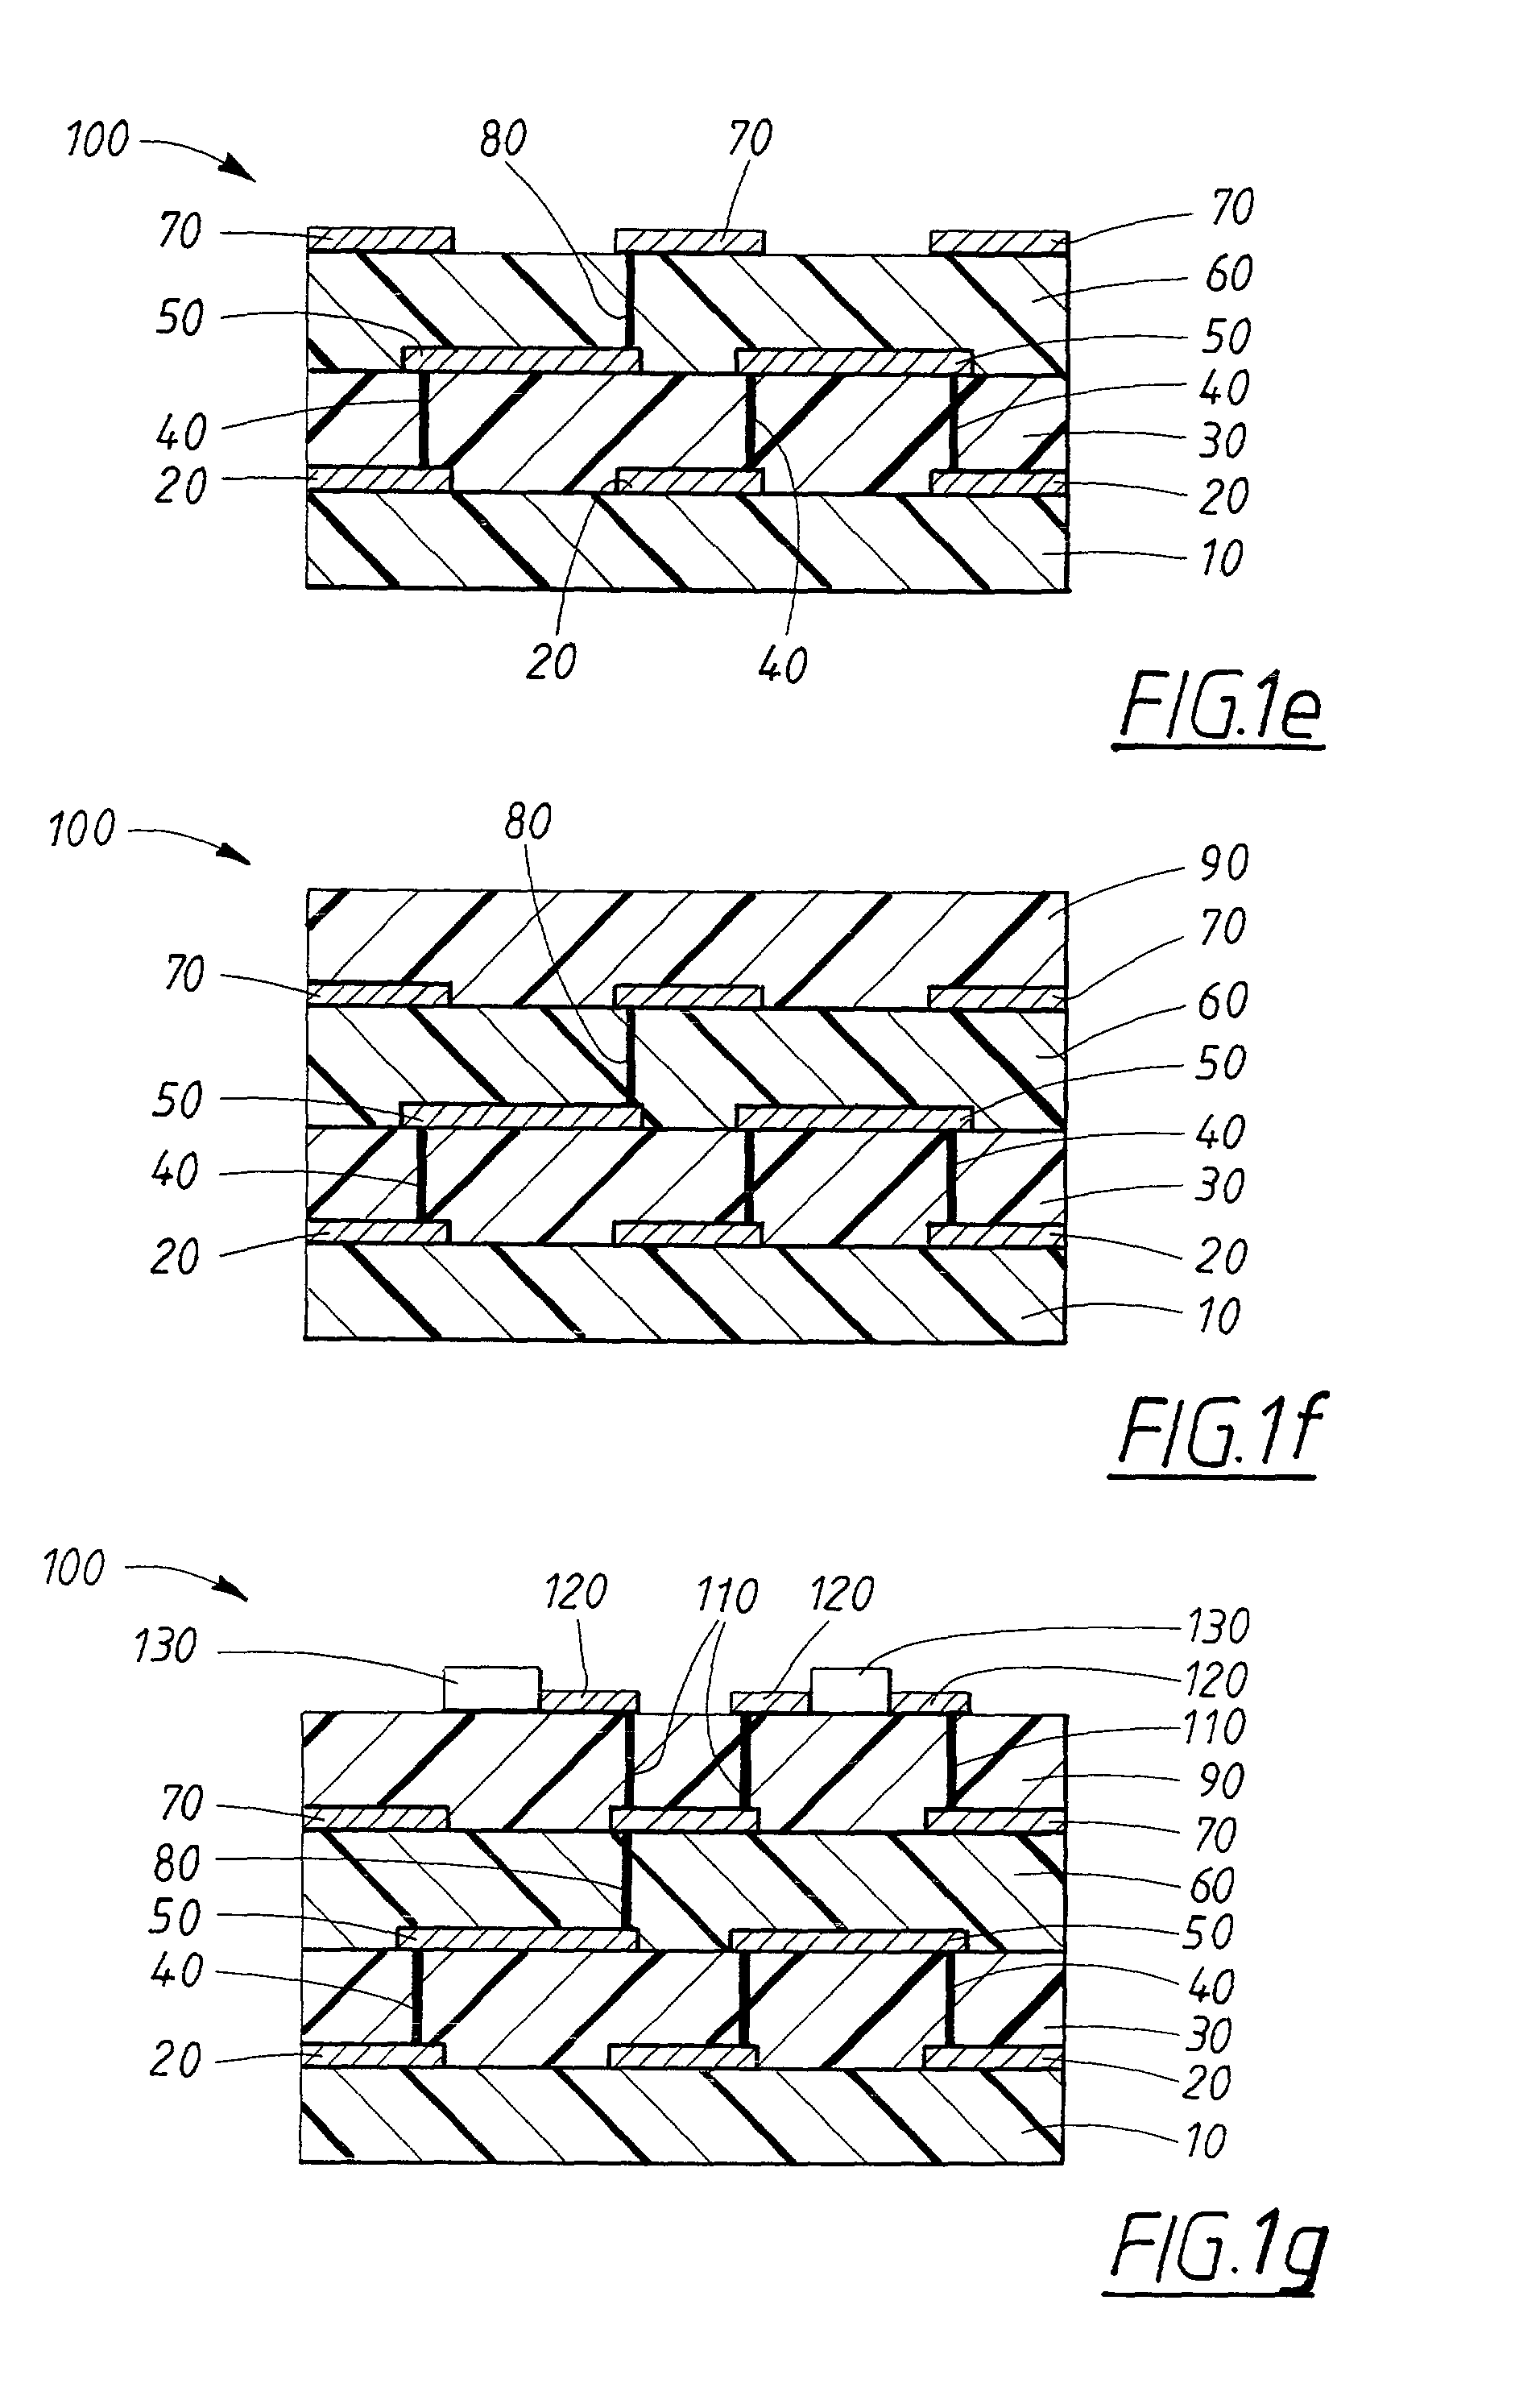 Multi-layer circuit board with supporting layers of different materials